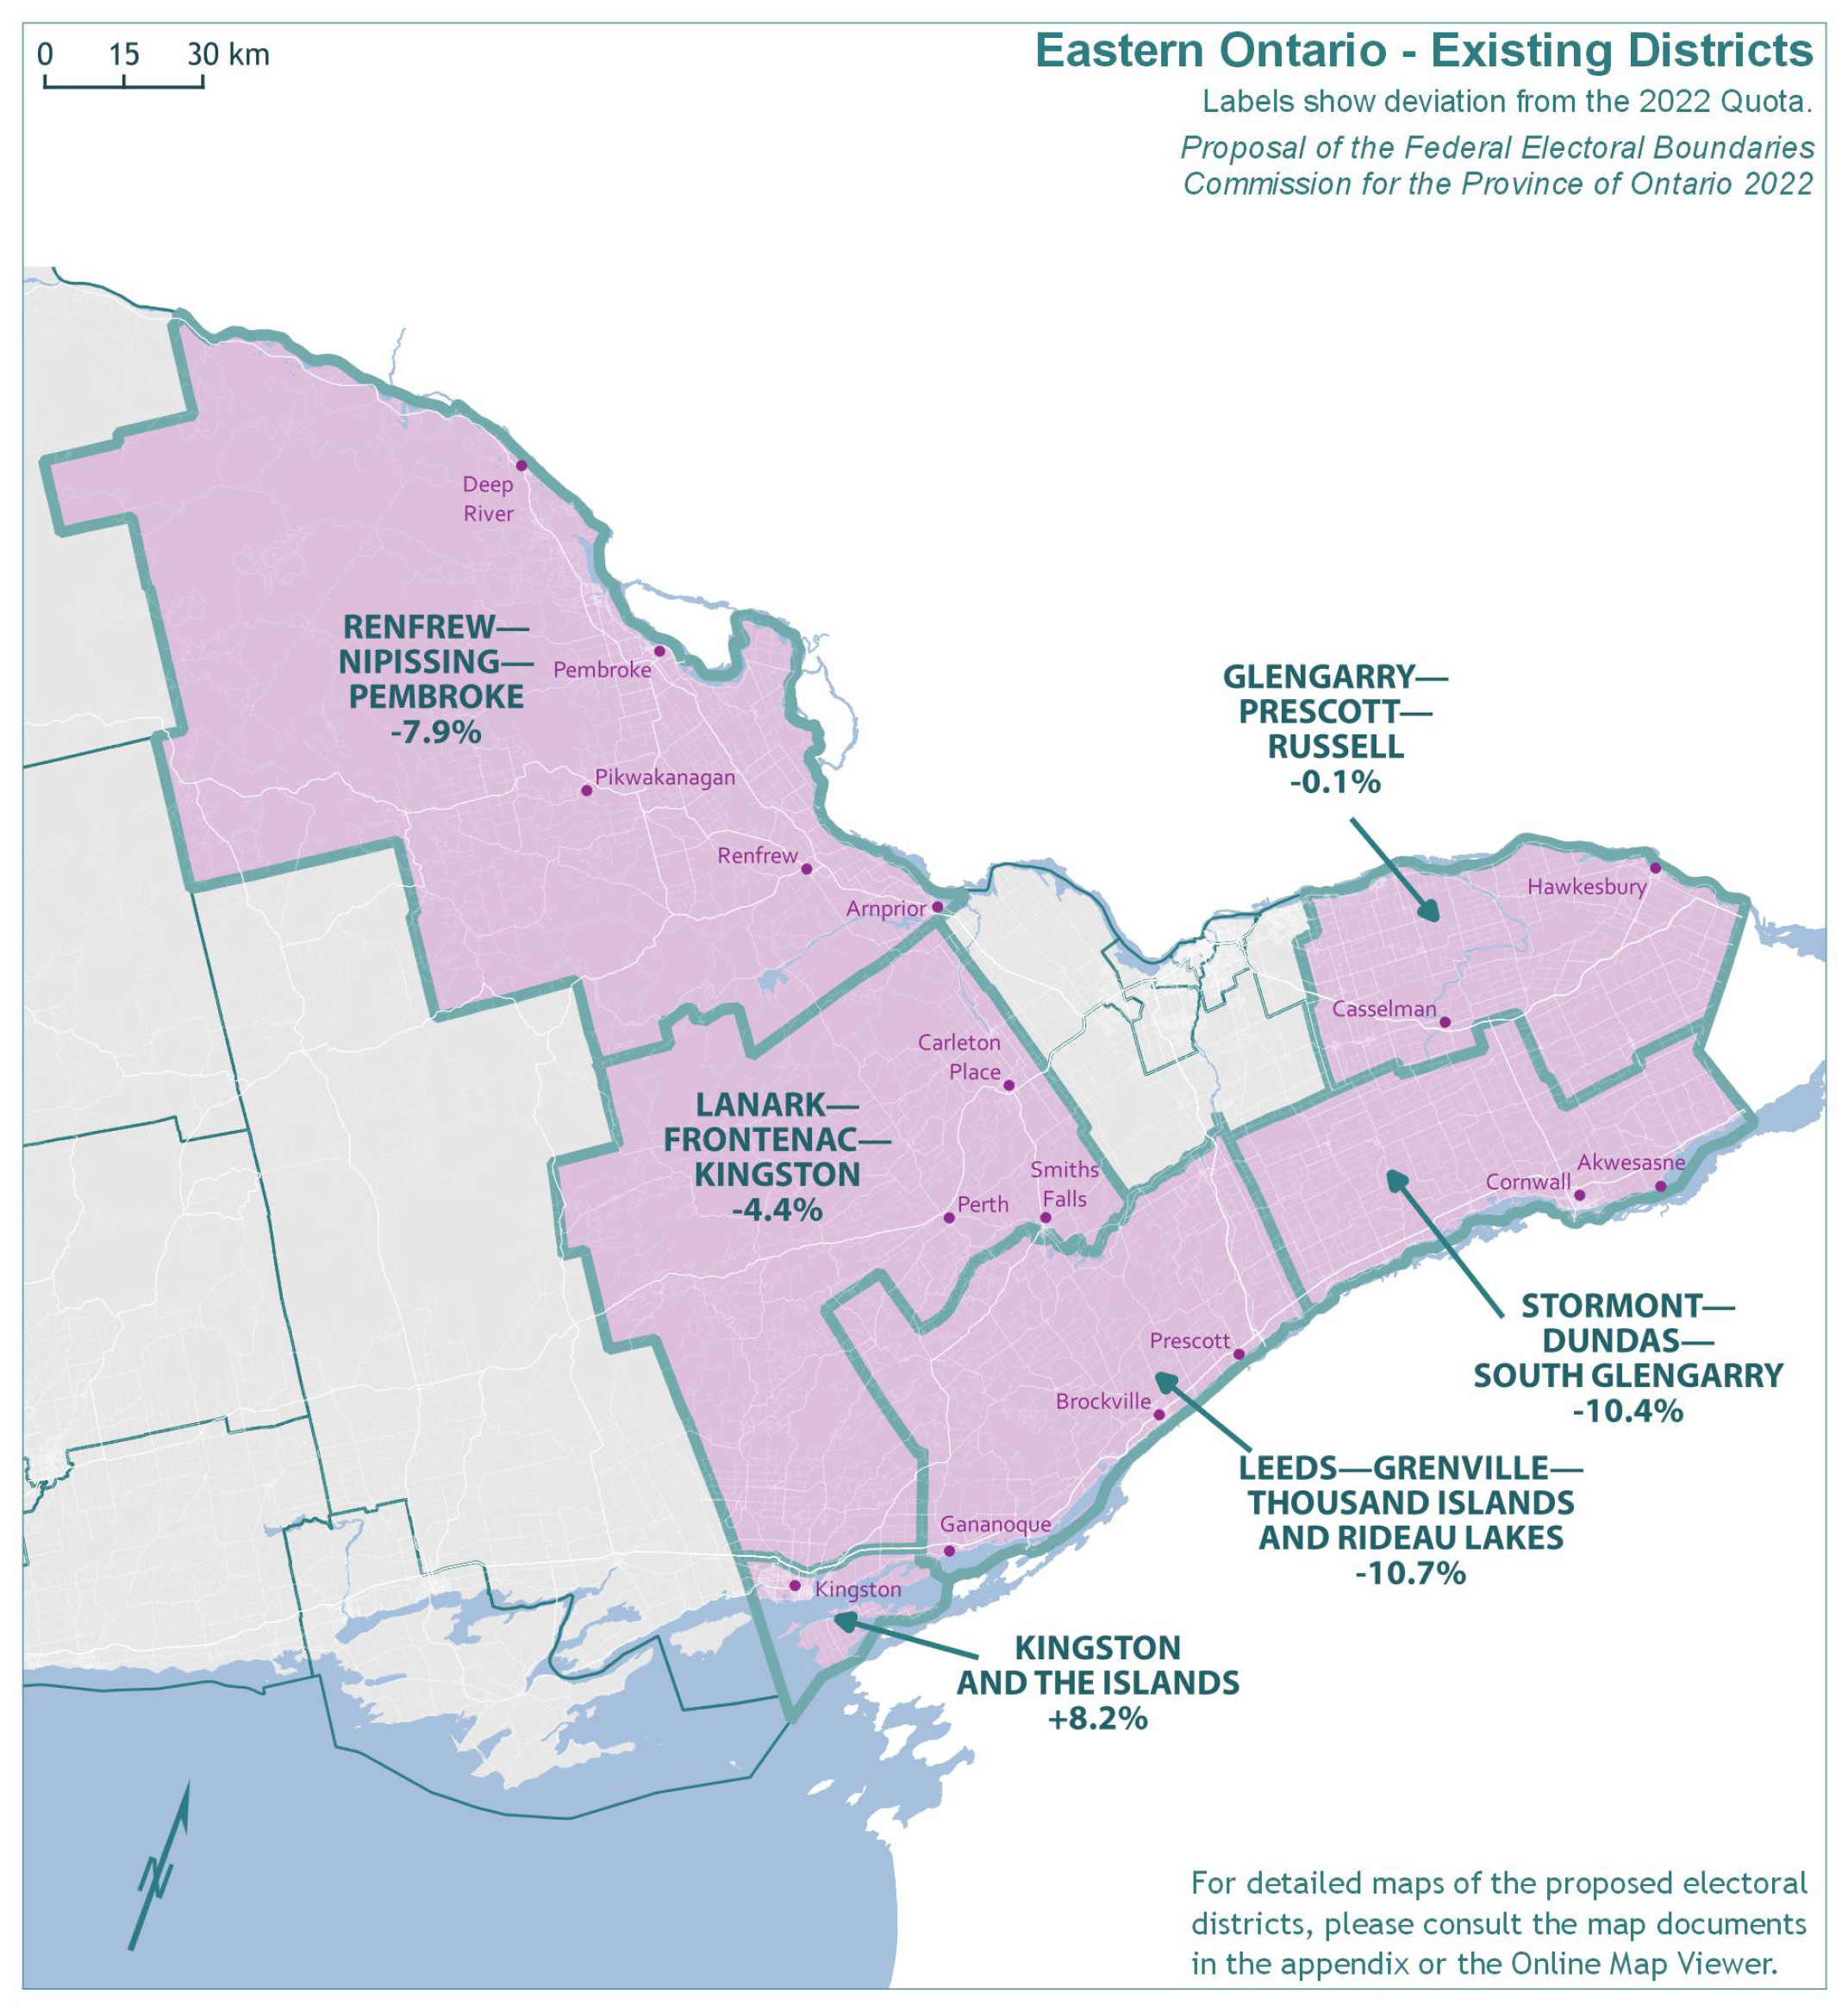 Eastern Ontario - Existing Districts 